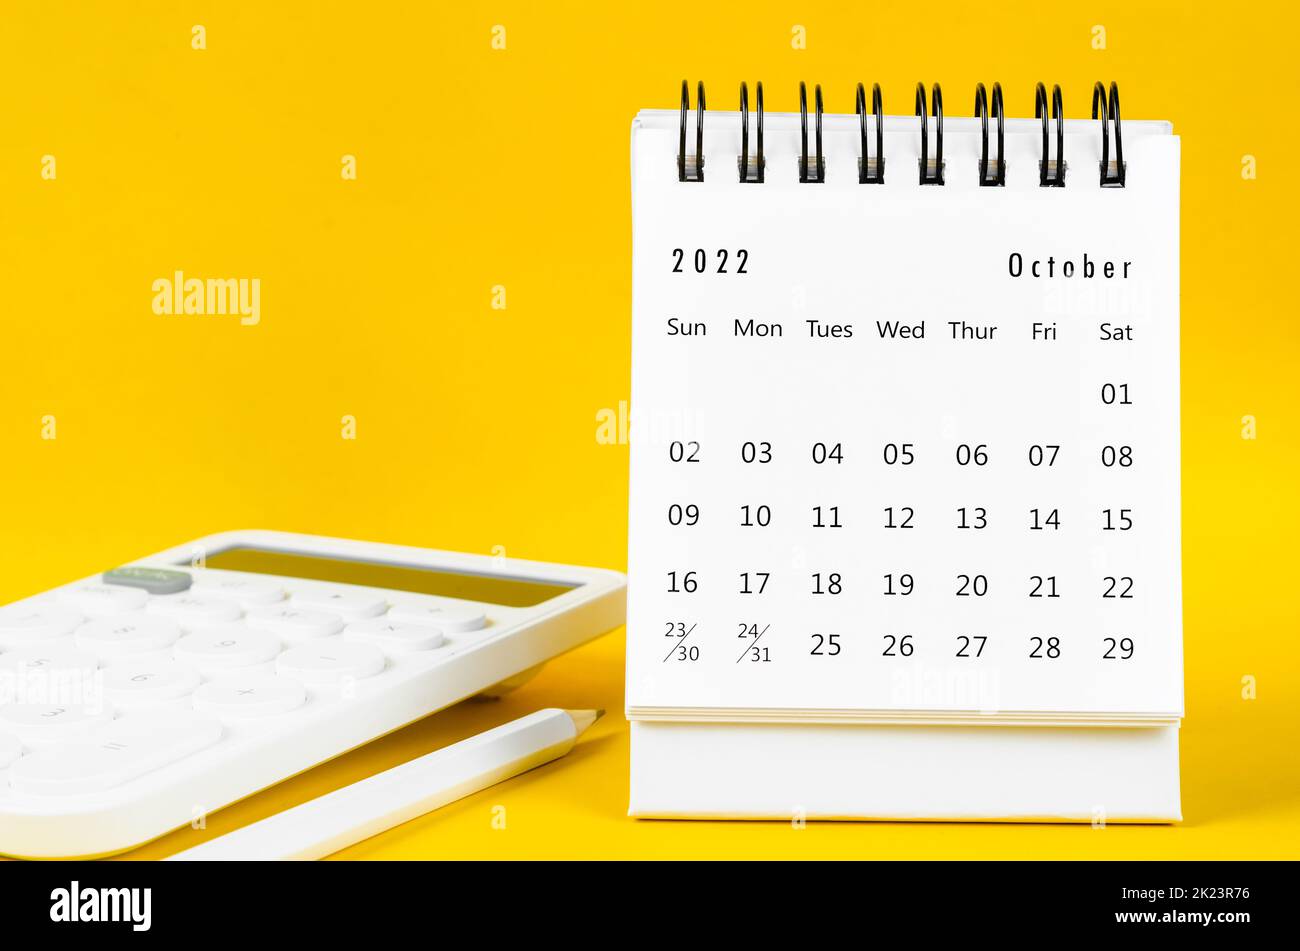 October 2022 Monthly desk calendar for 2022 year and calculator with pen on yellow background. Stock Photo